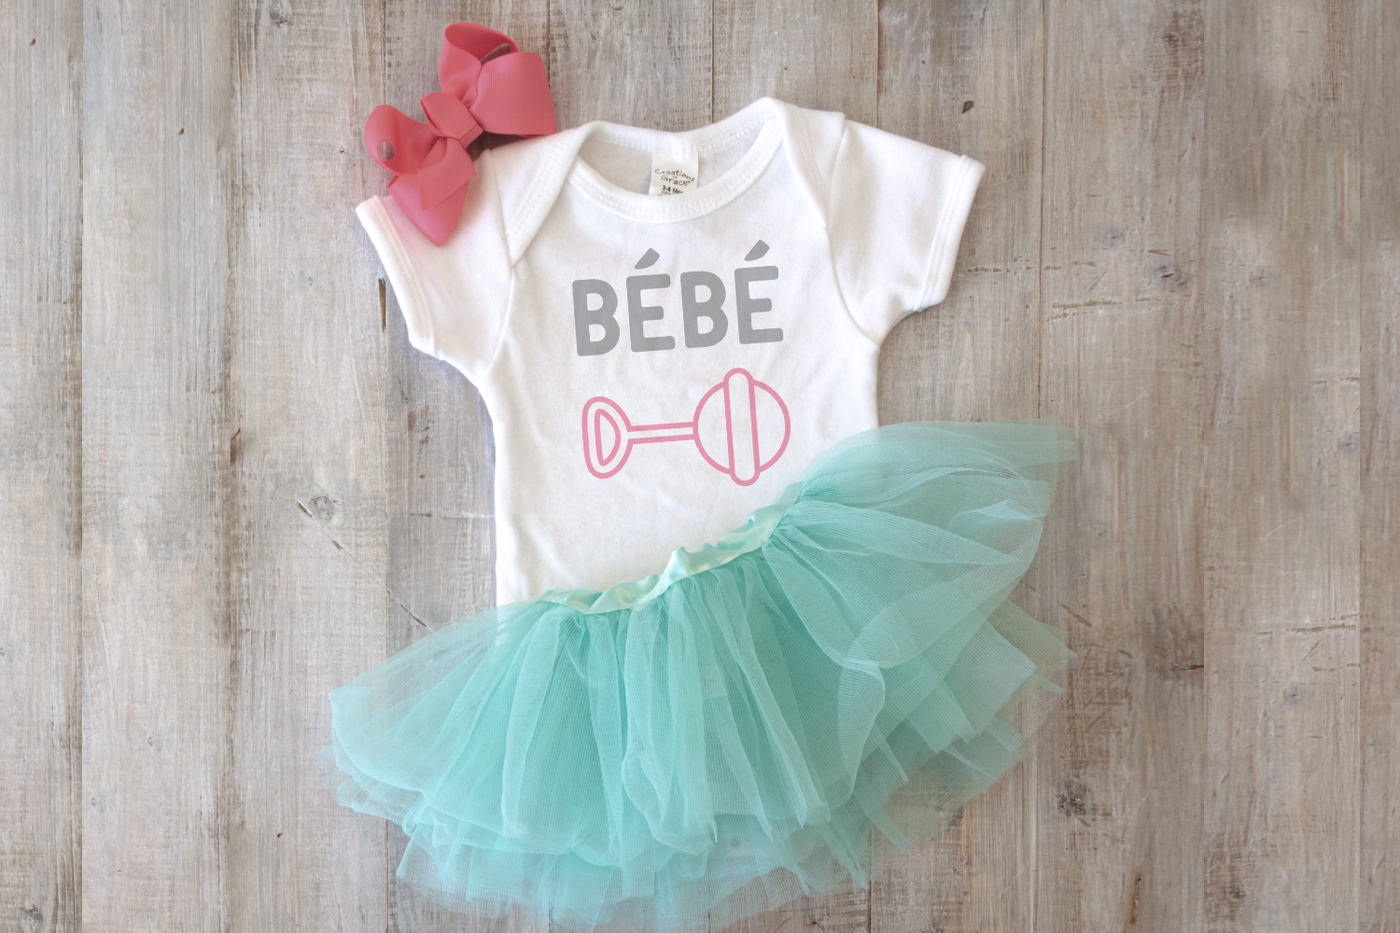 A white onesie with an aqua tutu and pink bow lays on a wooden surface. The onesie says "bébé" and has a line drawing of a rattle below.